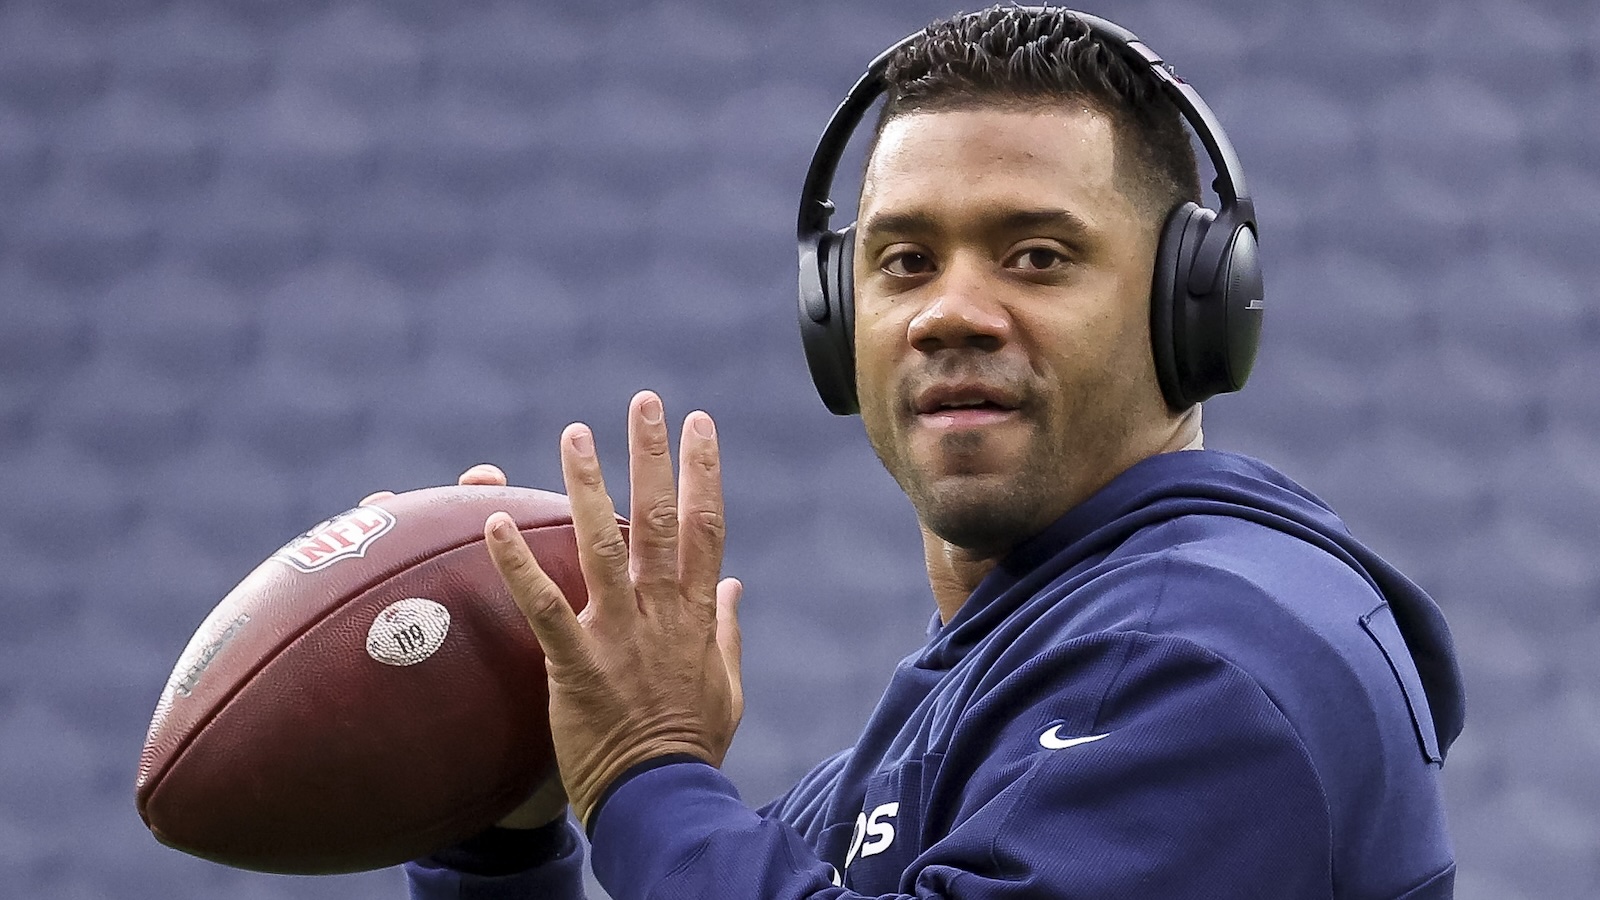 Russell Wilson's Bold Vision: Aiming for Super Bowl Glory Amid Challenges